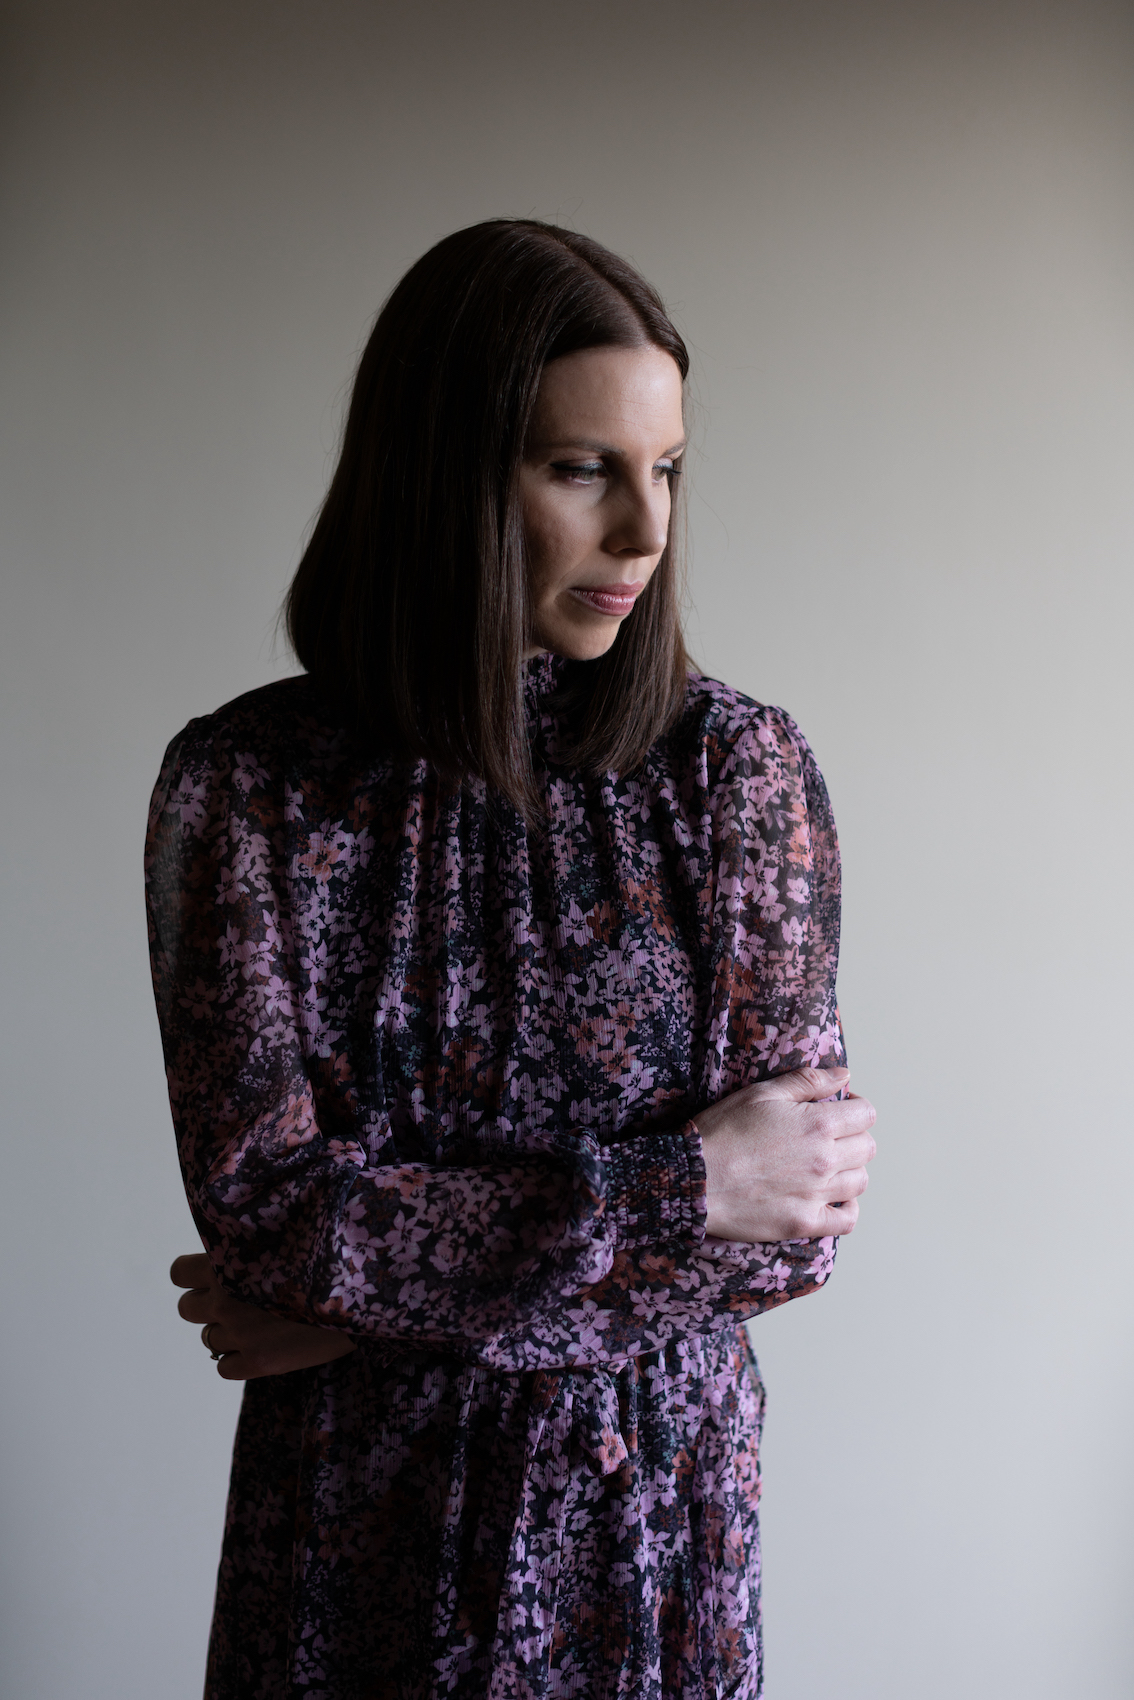 PERTH SINGER/SONGWRITER, HELEN SHANAHAN DELIGHTS WITH NEW SINGLE ‘CANVAS’, ANNOUNCES NEW ALBUM + PERTH LAUNCH